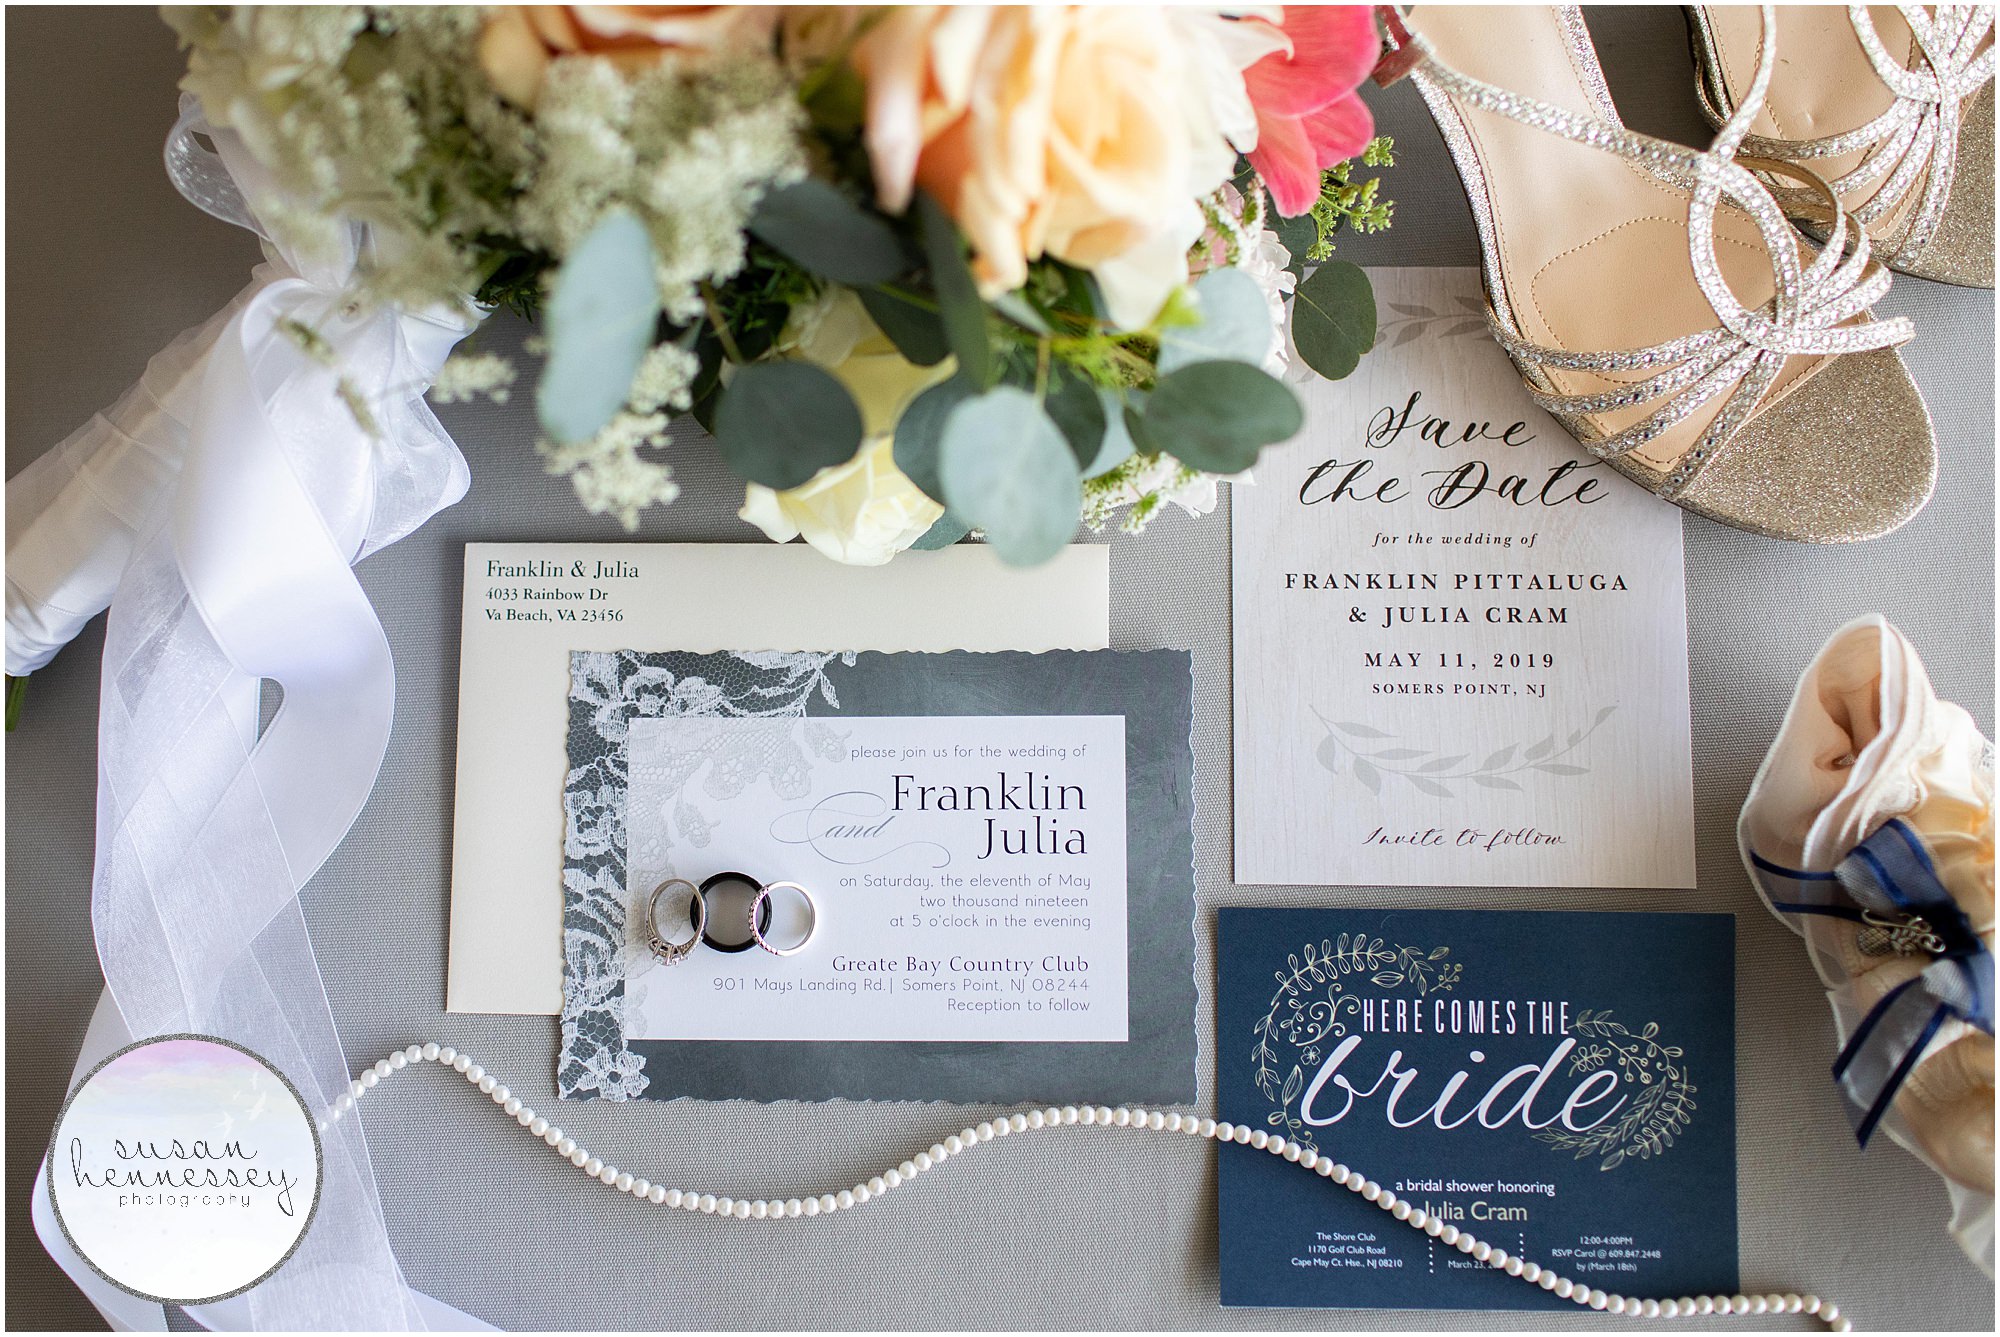 Bridal details featuring invitation, wedding bands, pearl necklace, garter and shoes.